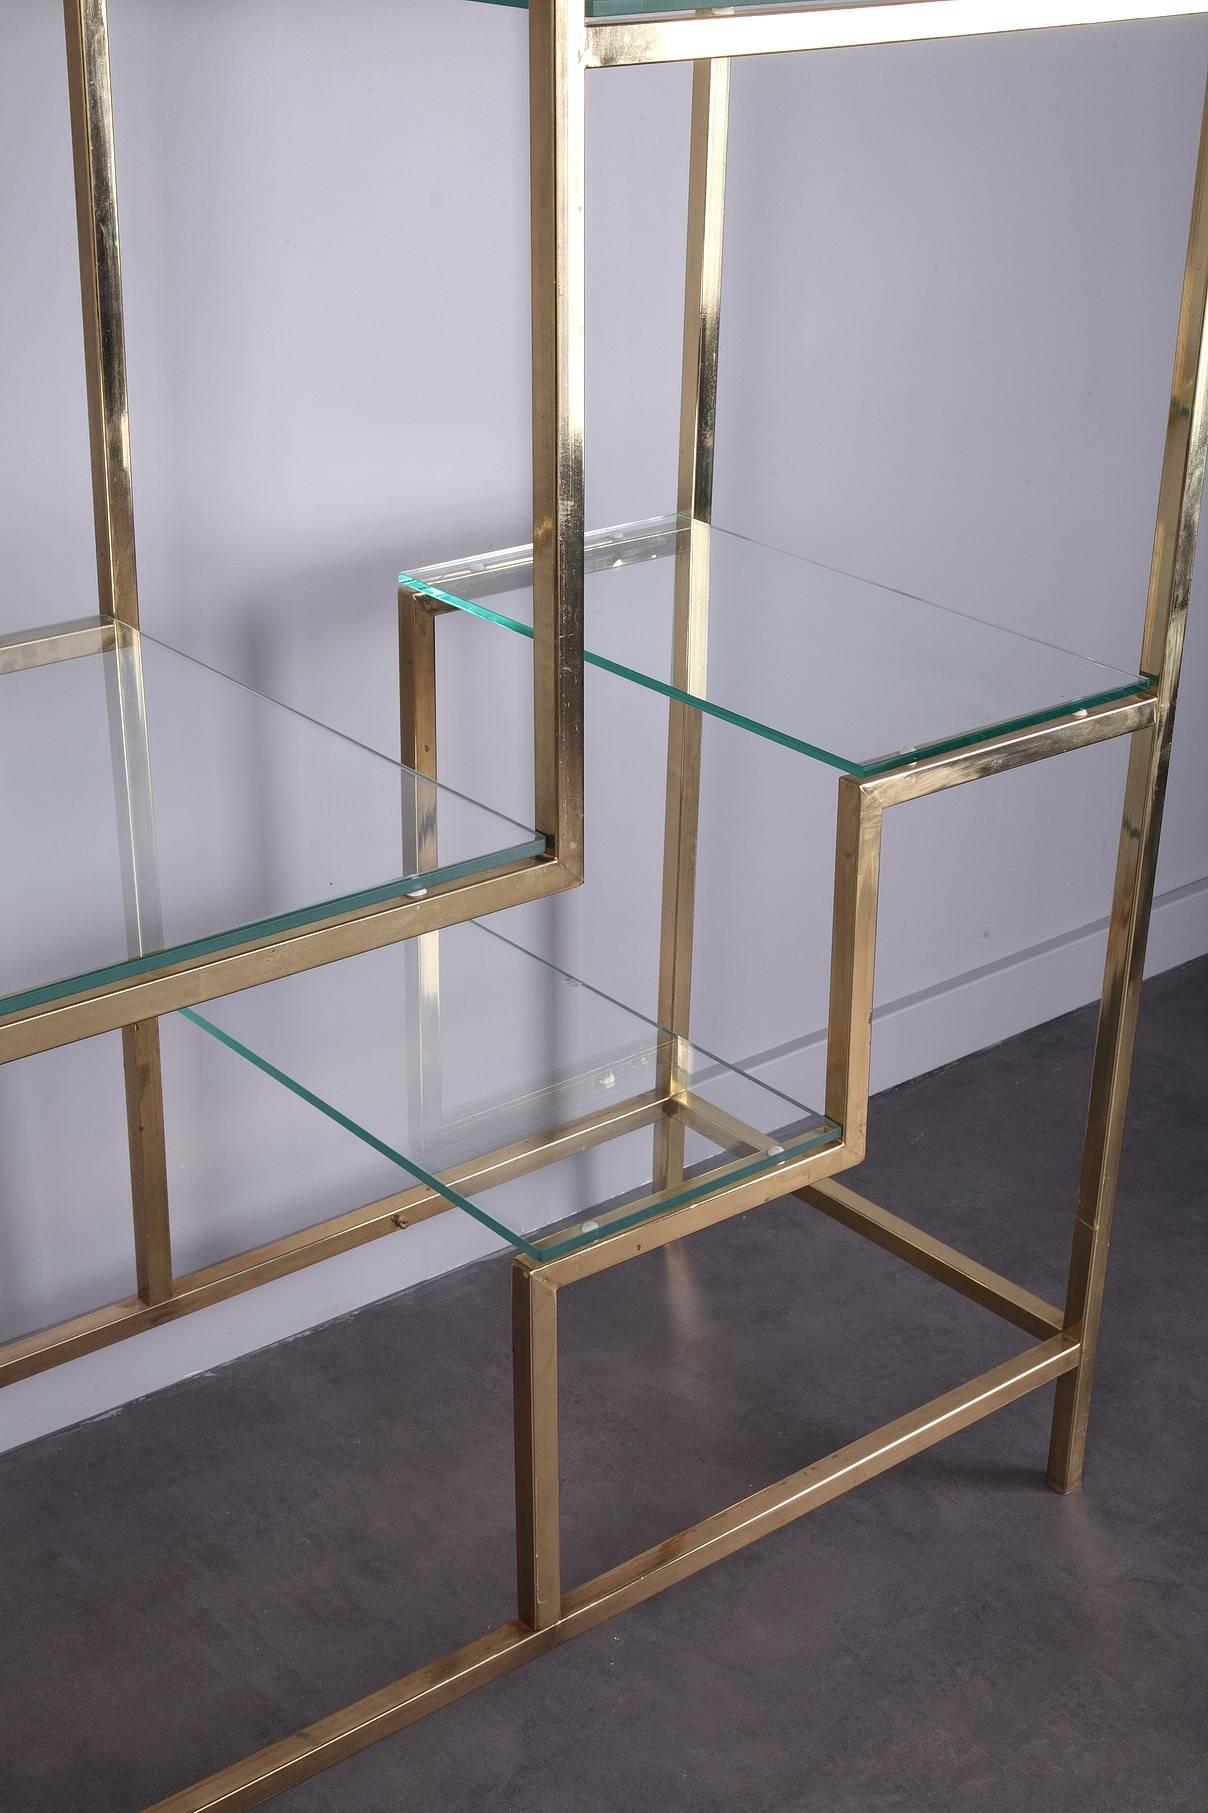 Large brass bookcase by Kim Moltzer (1938-2015) from the 1970s. It has a beautiful sculptural geometric form, finished in brass, which support 12 glass display shelves and a further central display niche that adds a strong central focal point. Good